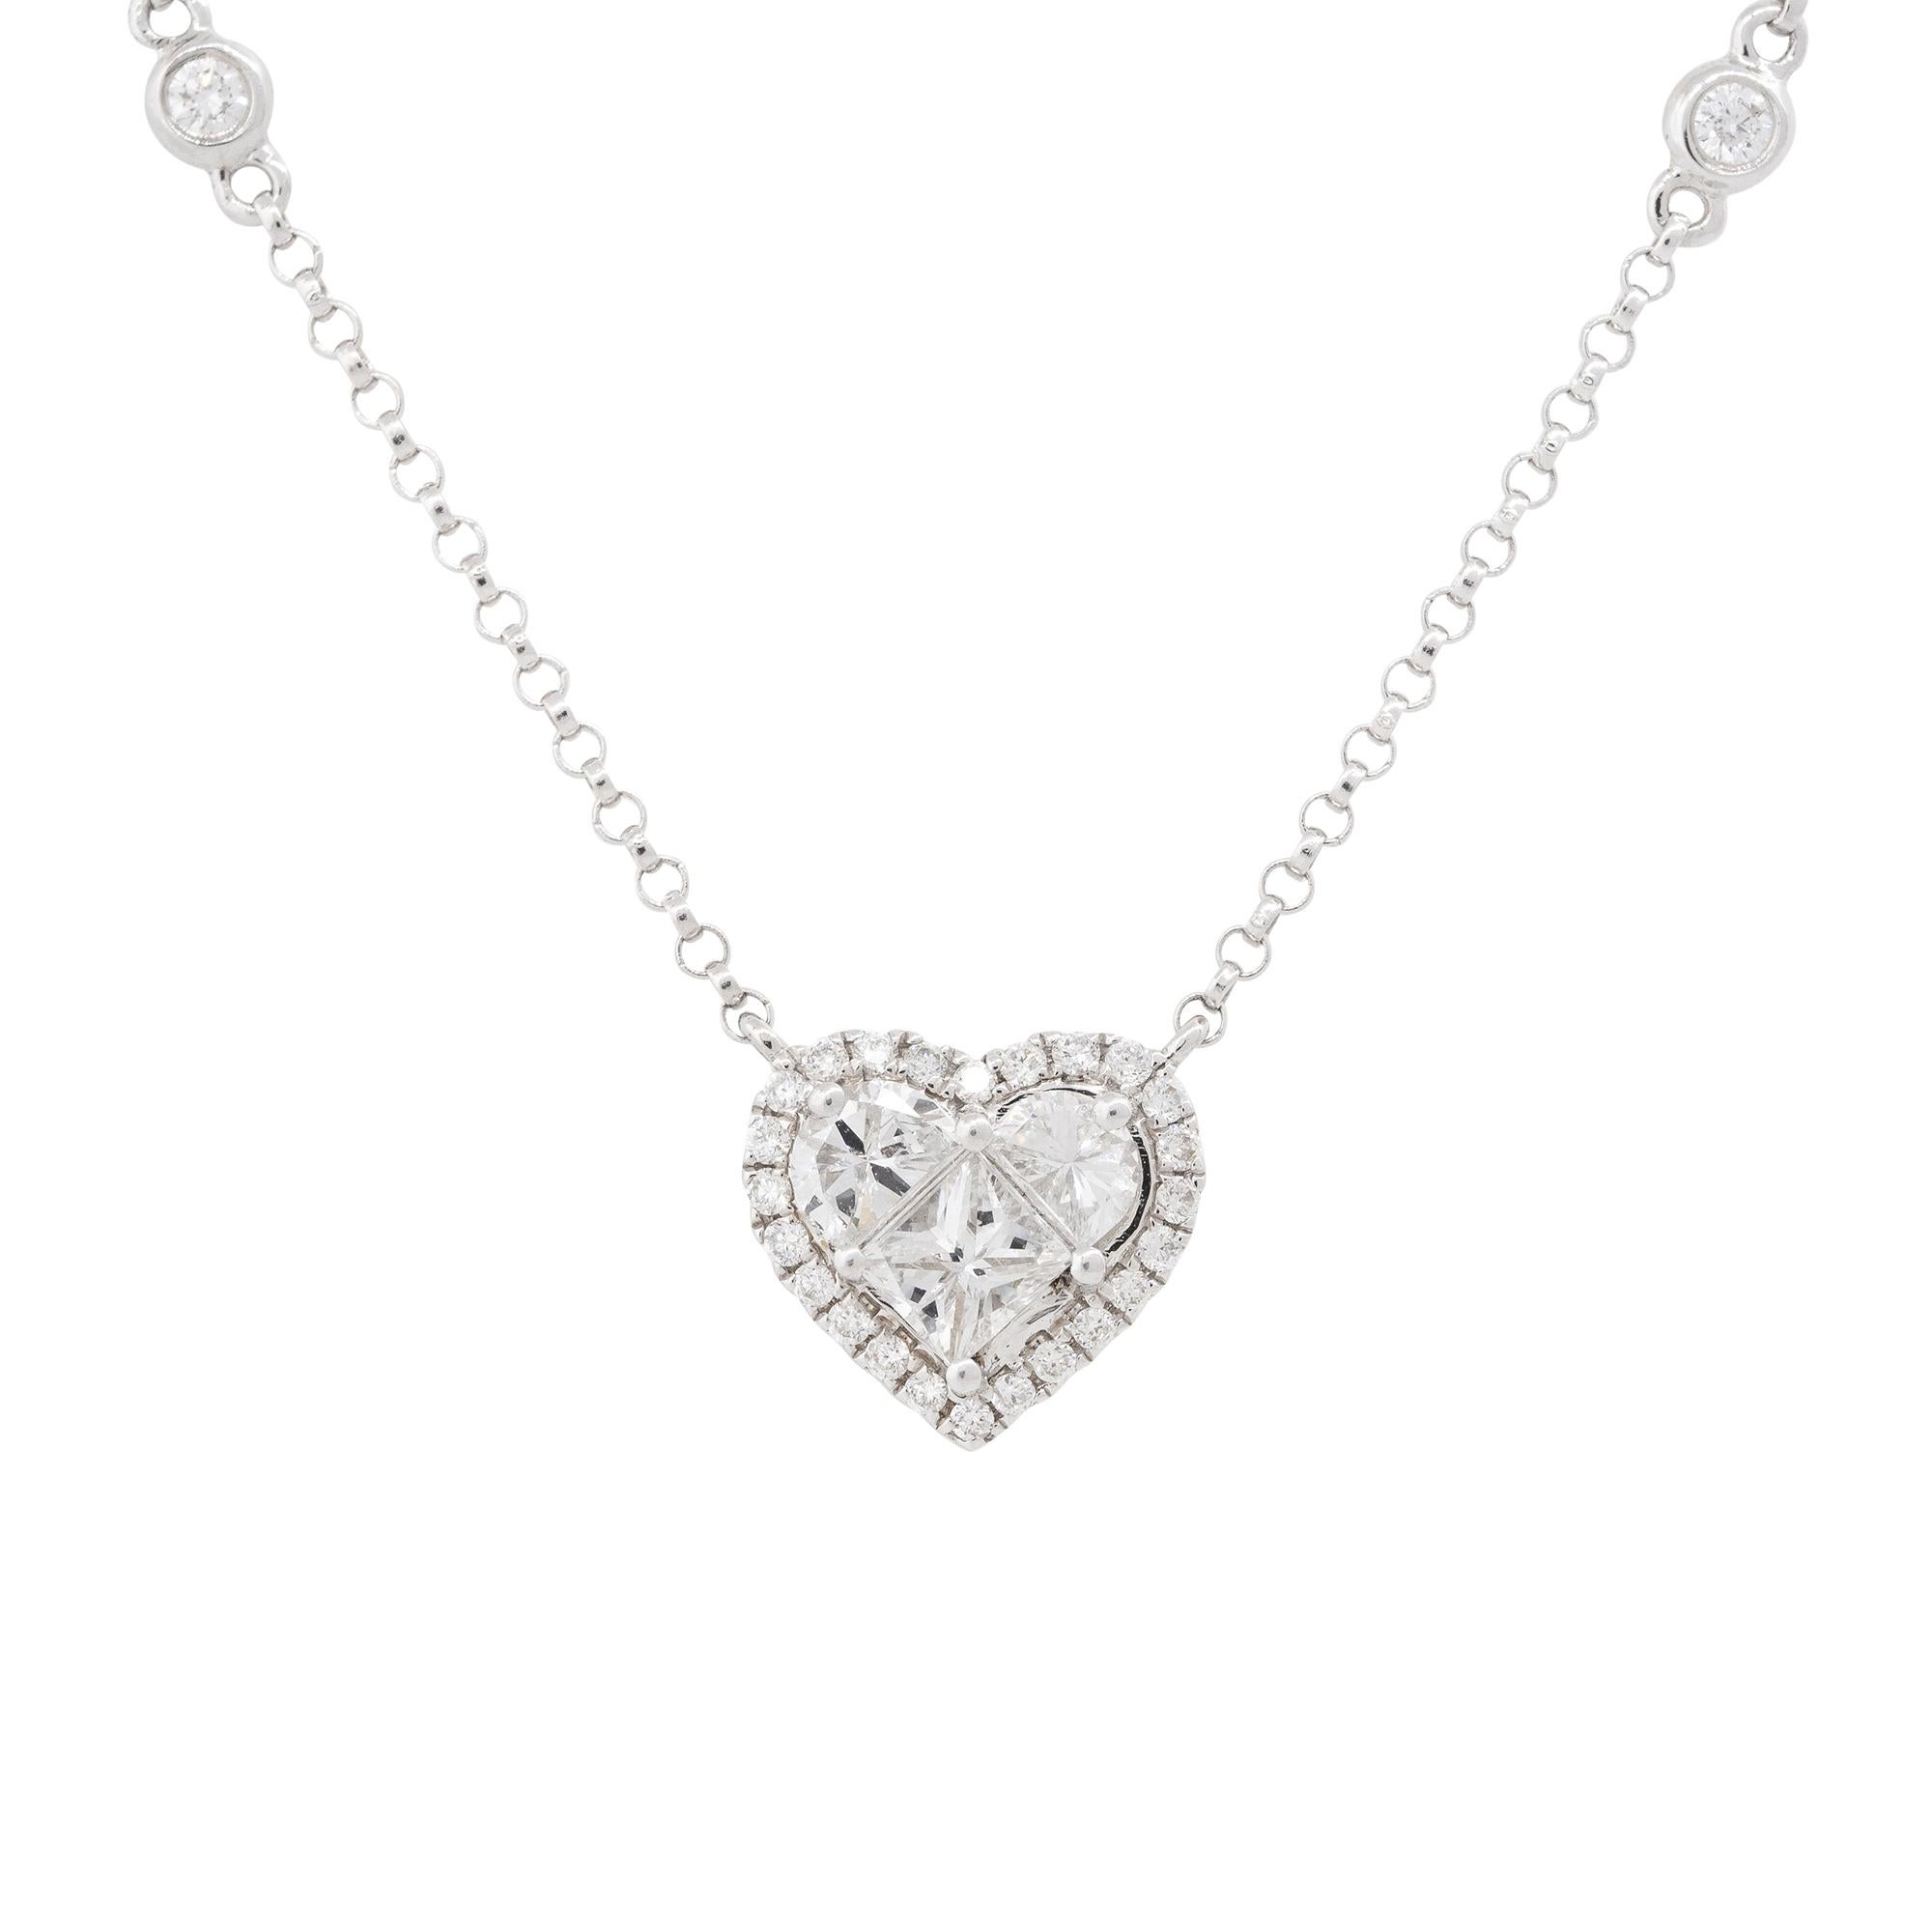 18k White Gold 0.87ctw Diamond Heart and Diamond Station Necklace

Product: Diamond Heart Station Necklace
Material: 18k White Gold
Diamond Details: There are approximately 0.87 carats of Princess cut, modified Princess cut, and Round Brilliant cut